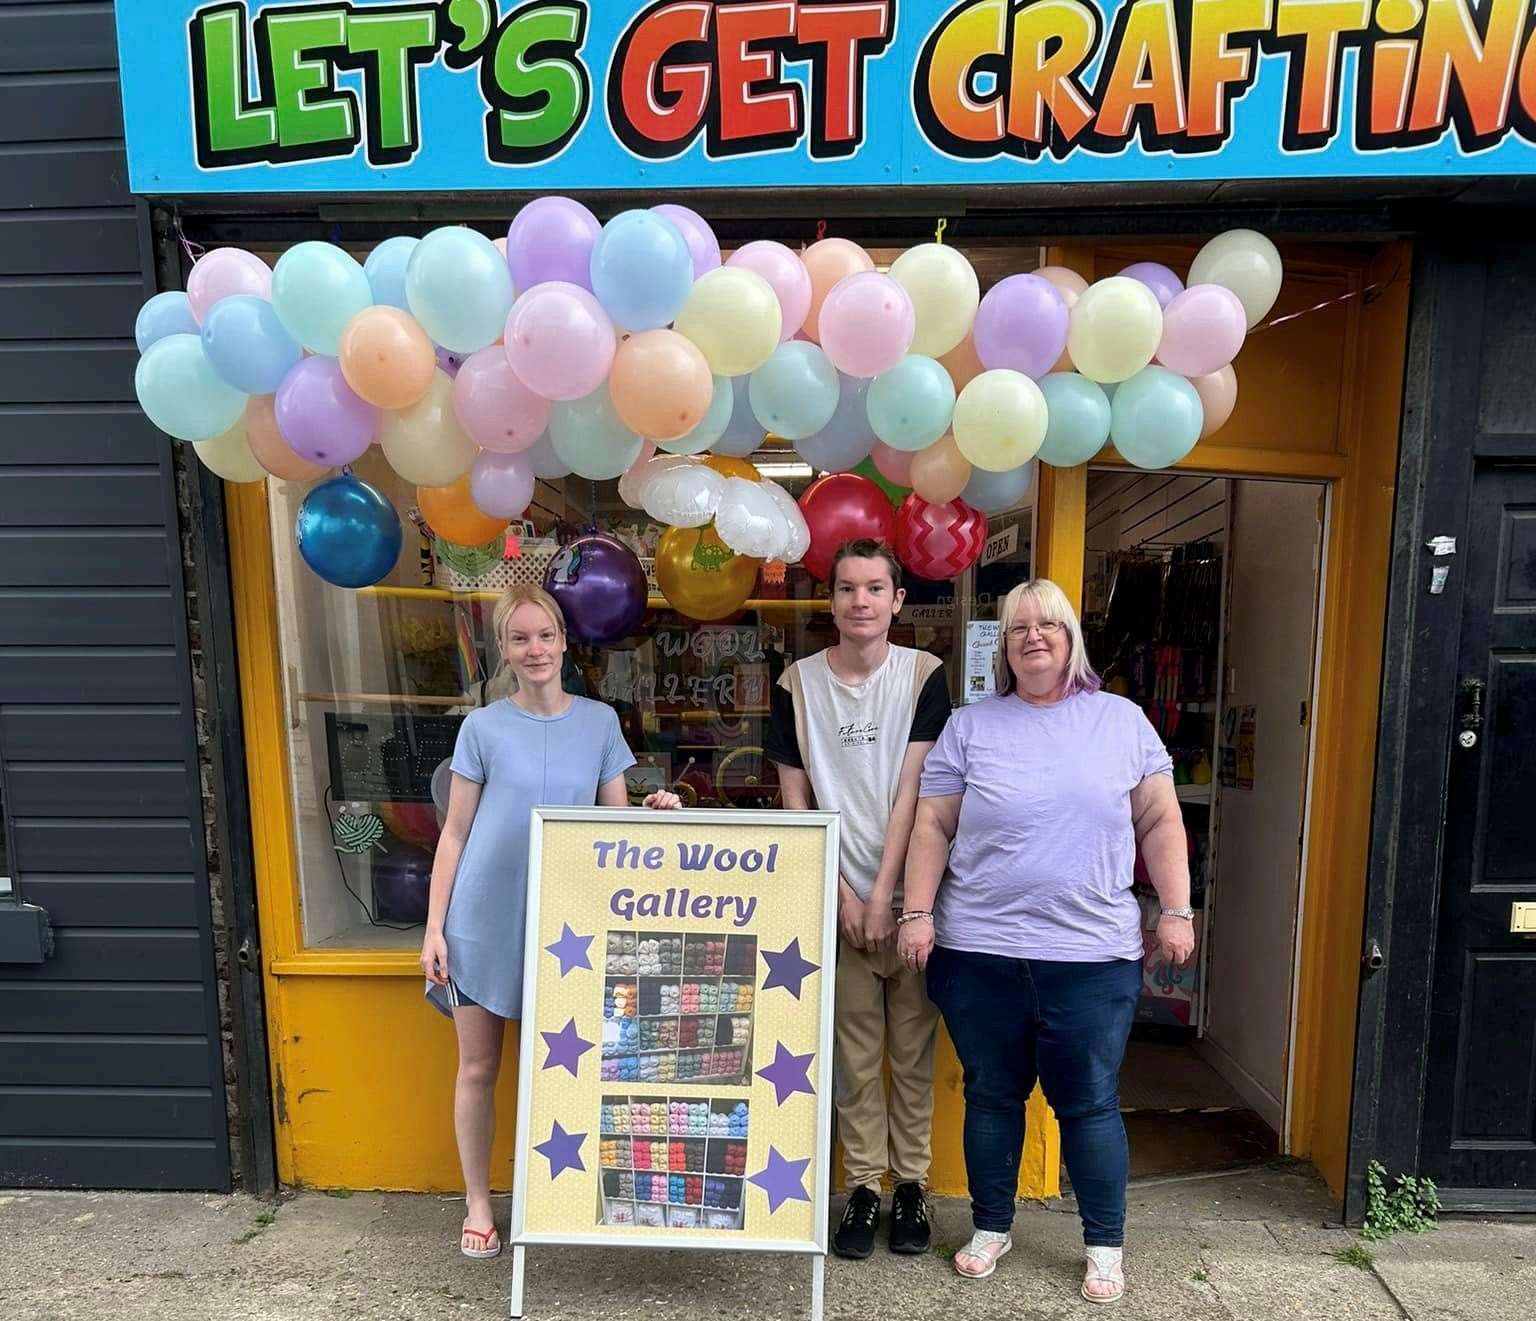 Hayley Stock (far right) runs Let's Get Crafting in Sheerness as a family business